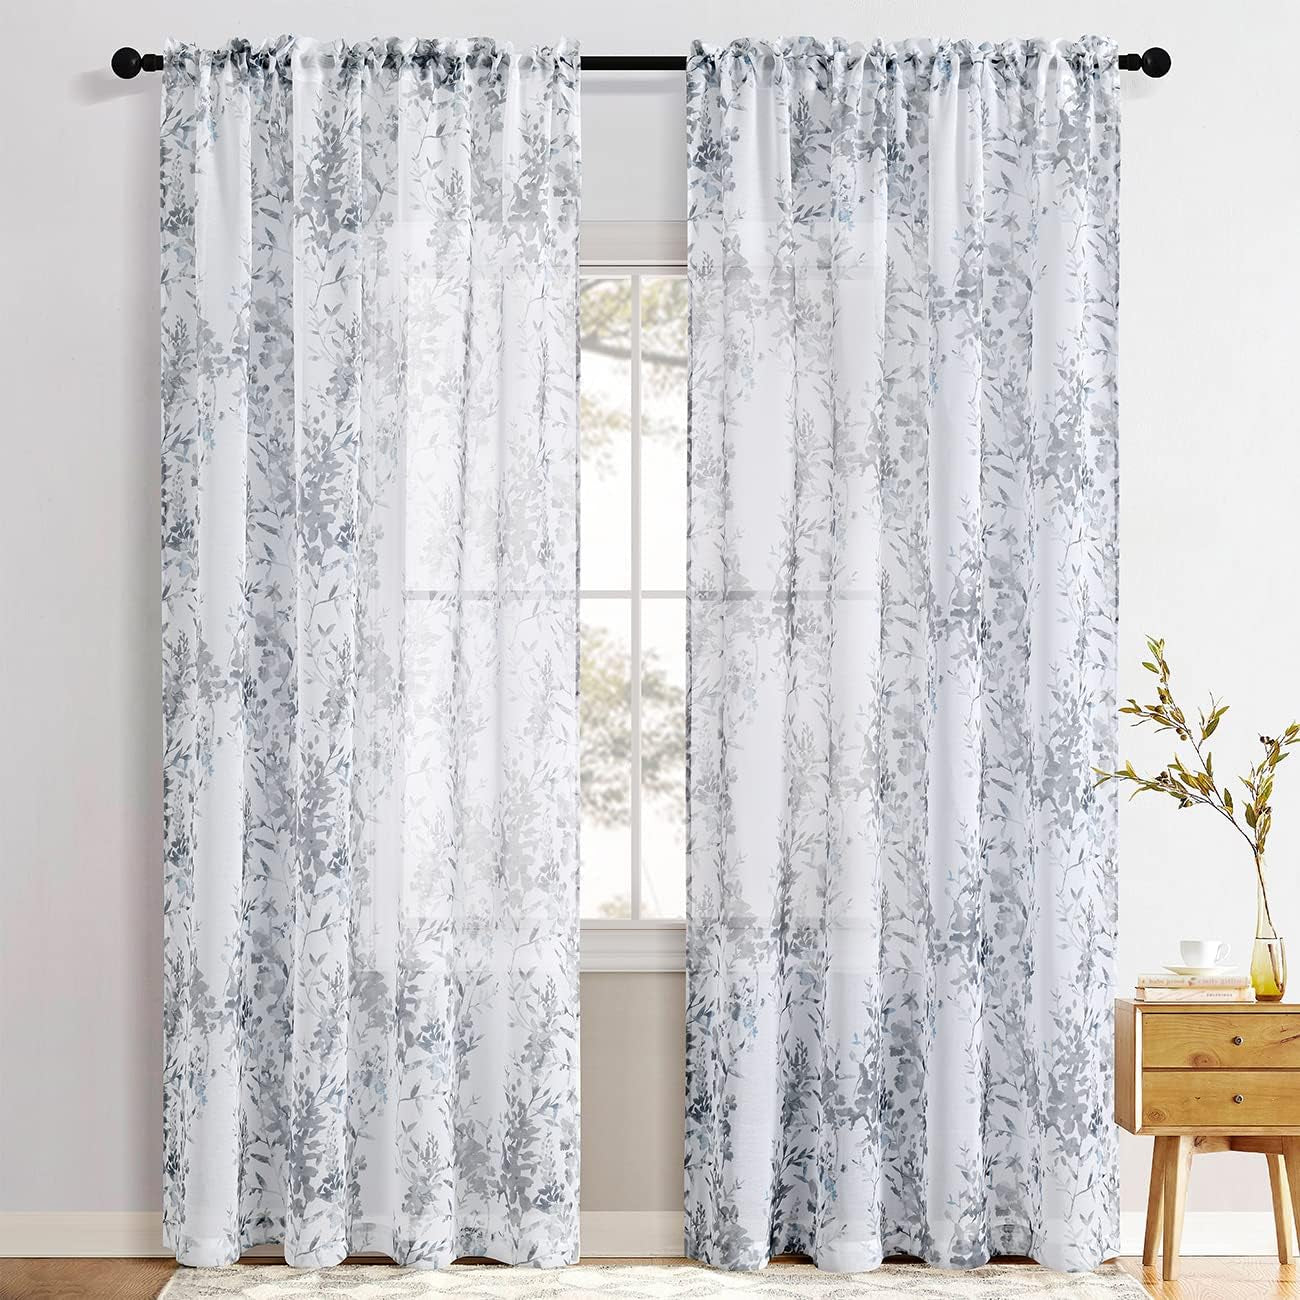 Kotile Grey White Sheer Curtains, Classic Vintage Branch Leaf Printed Sheer Curtains 63 Inch Length 2 Panels Set, Privacy Rod Pocket Sheer Window Floral Curtains, 50 X 63 Inch, Grey  Kotile Textile   